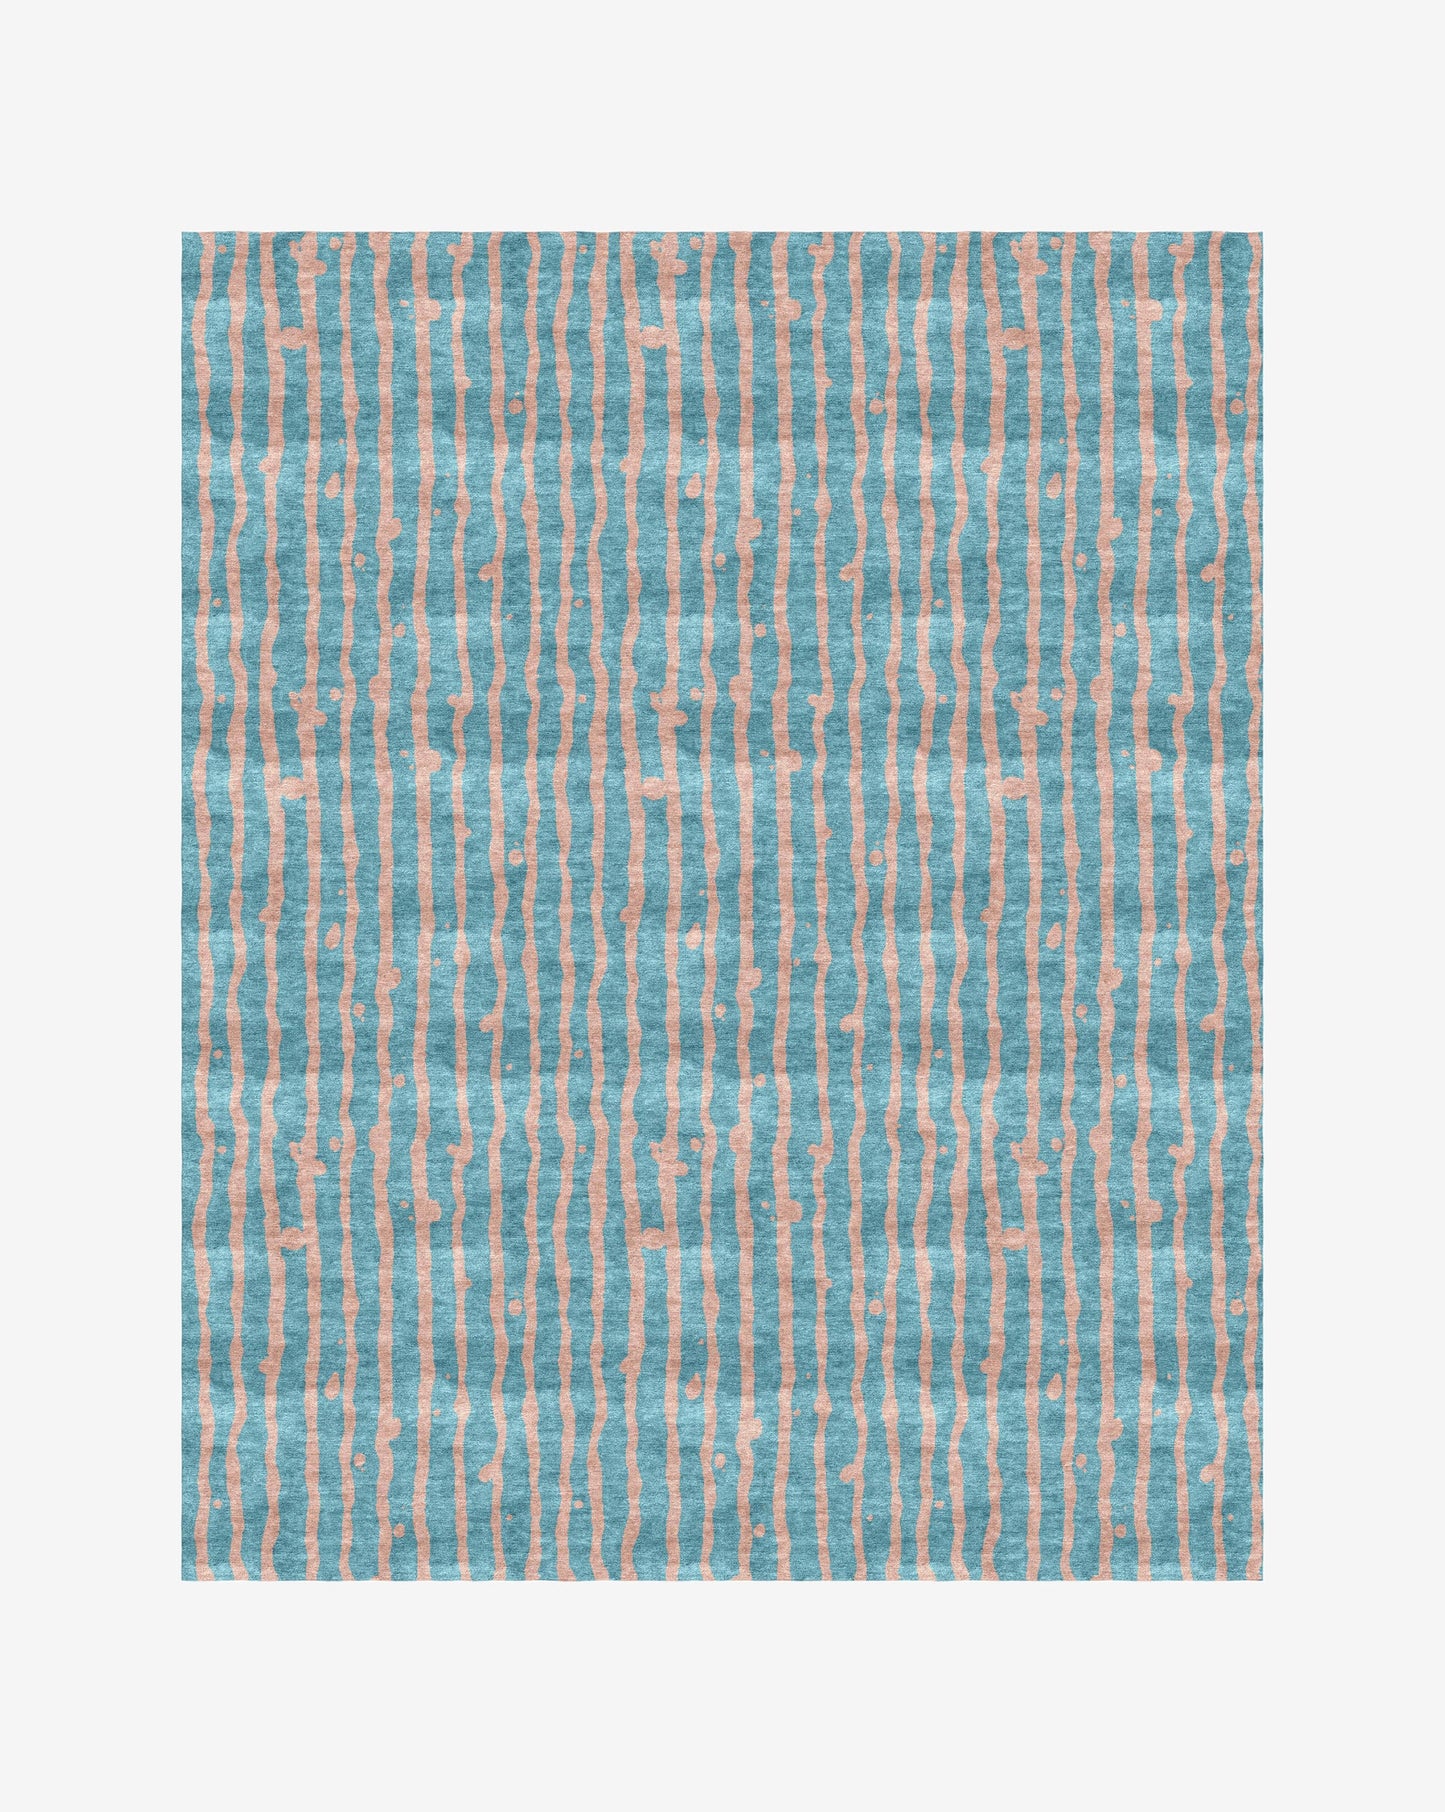 A Drippy Stripe Hand Knotted Rug  Morea with a blue and pink striped pattern on a white background